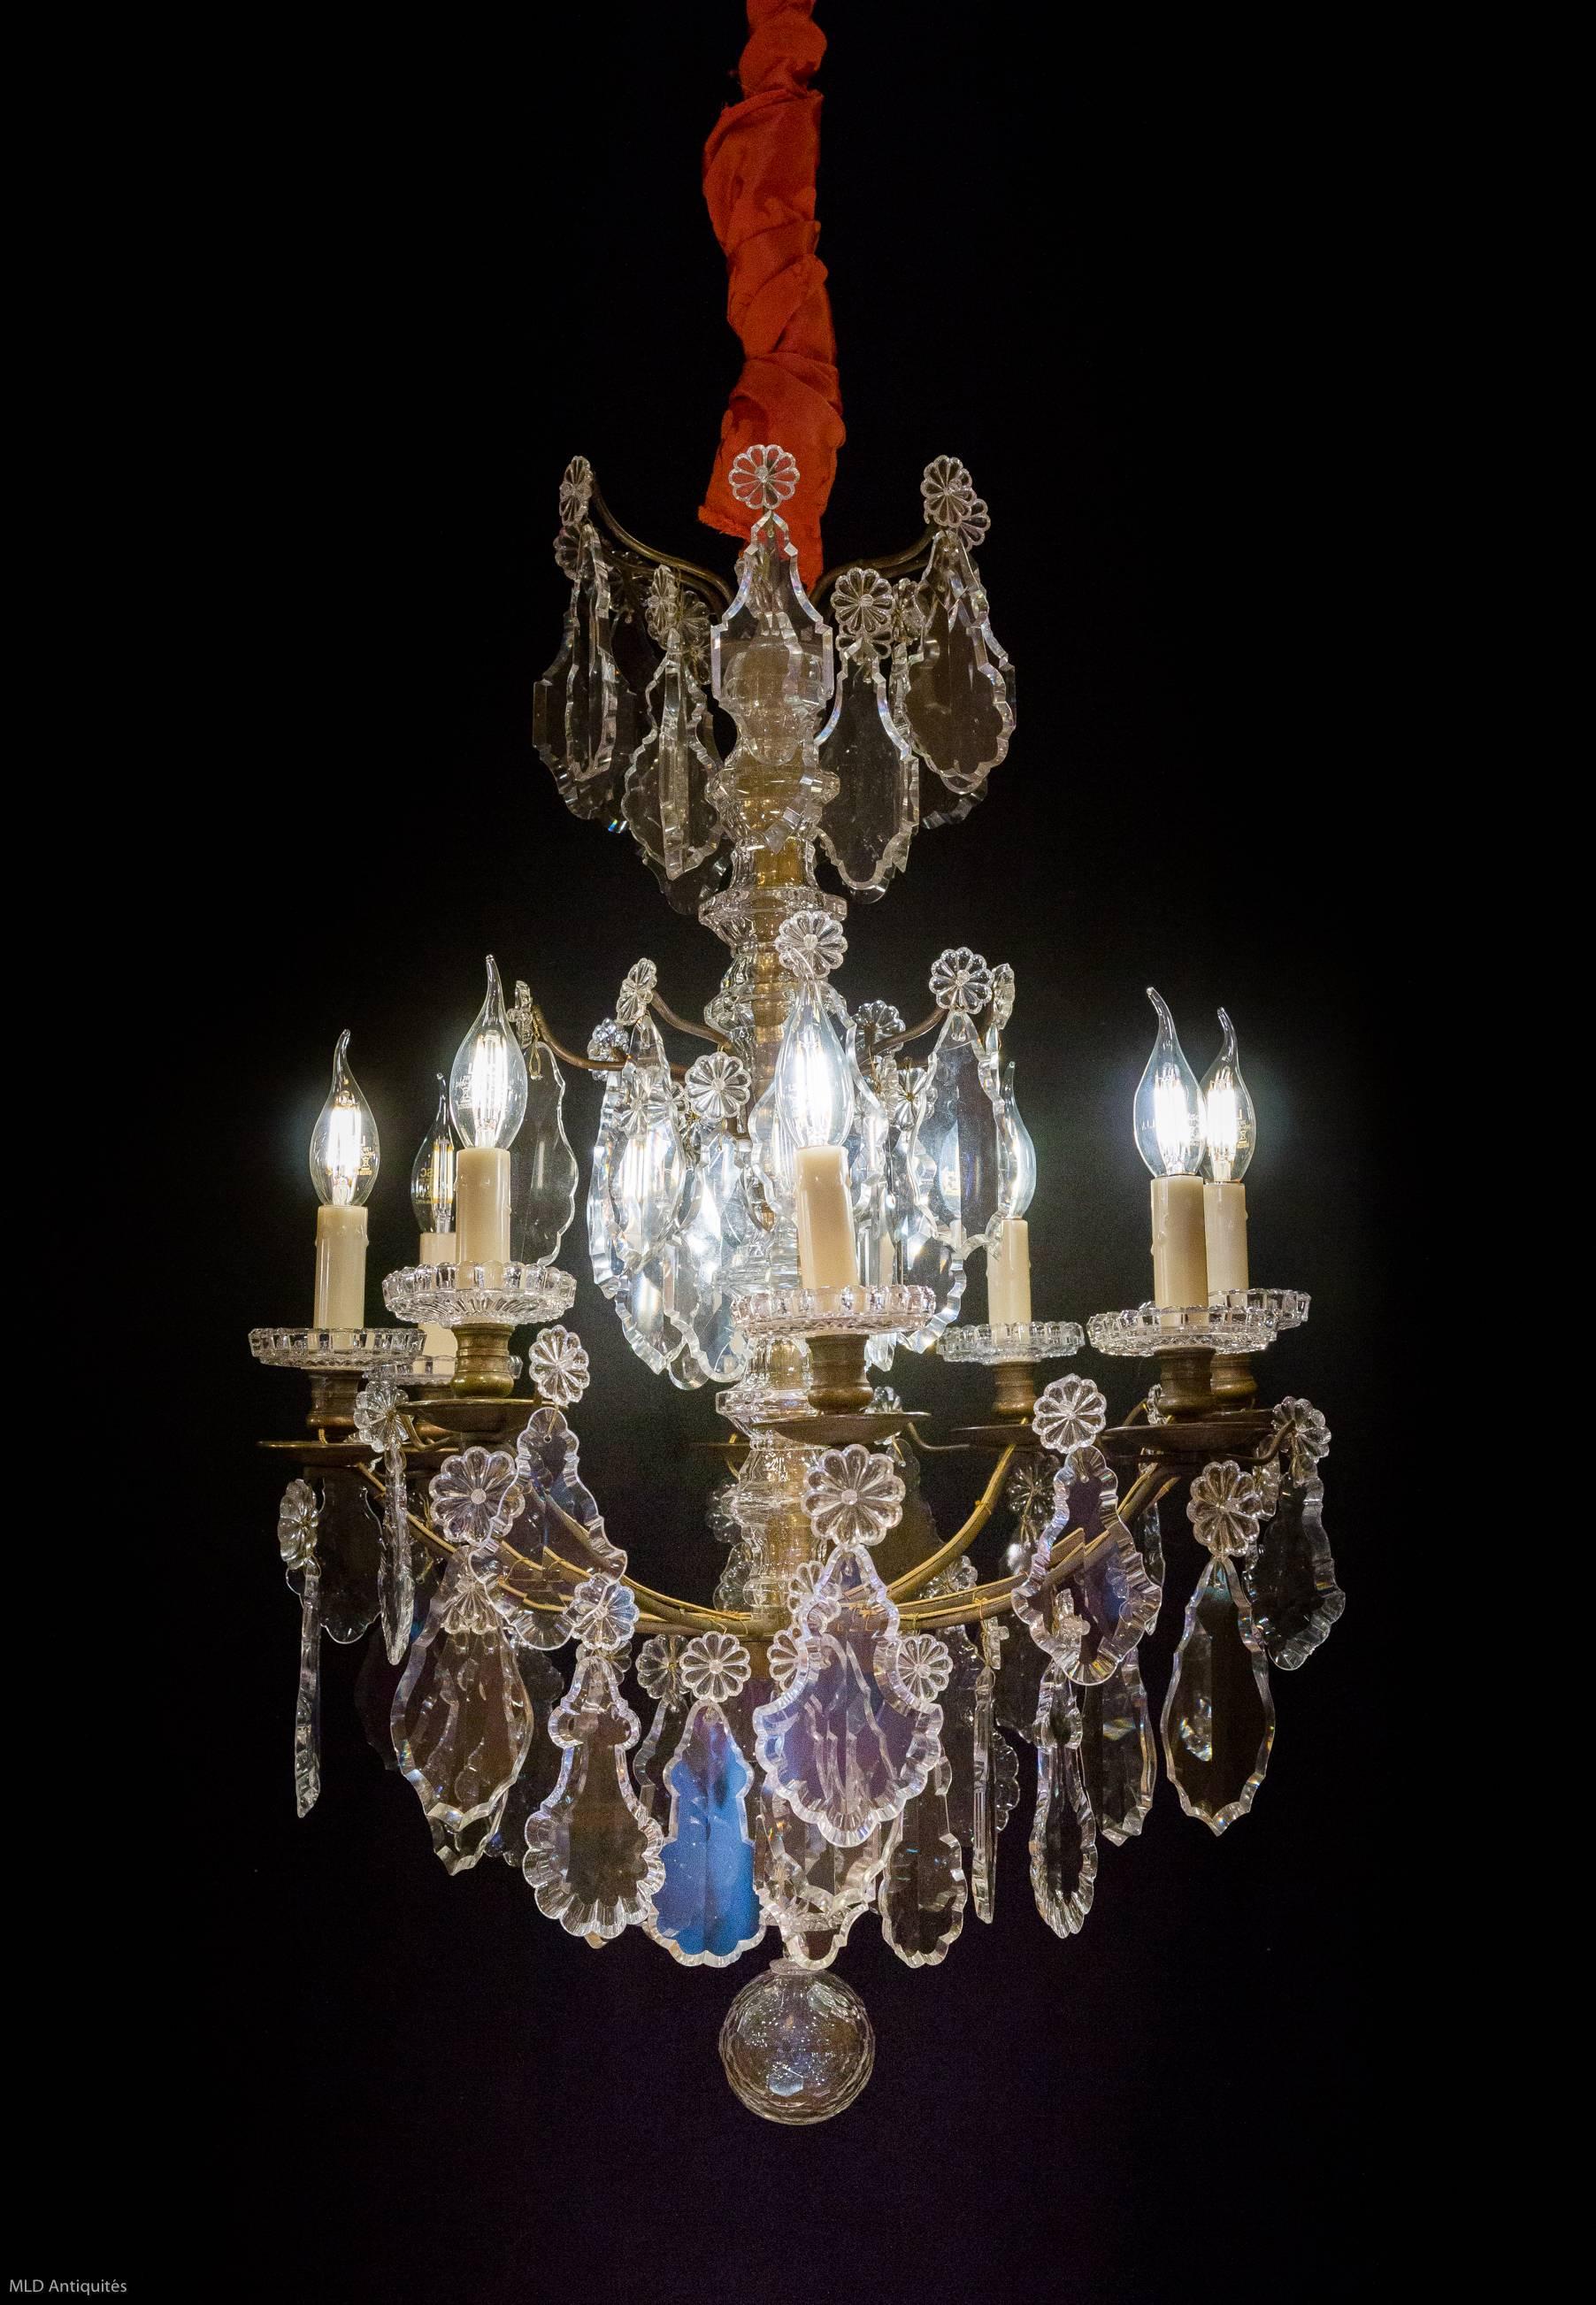 We are pleased to present you a lovely ormolu patinated and hand-cut crystal, form "tige" chandelier in the classic Louis XIV style. Our chandelier is composed of height arm lights.

Baccarat fine quality hand-cut crystal plaquettes and